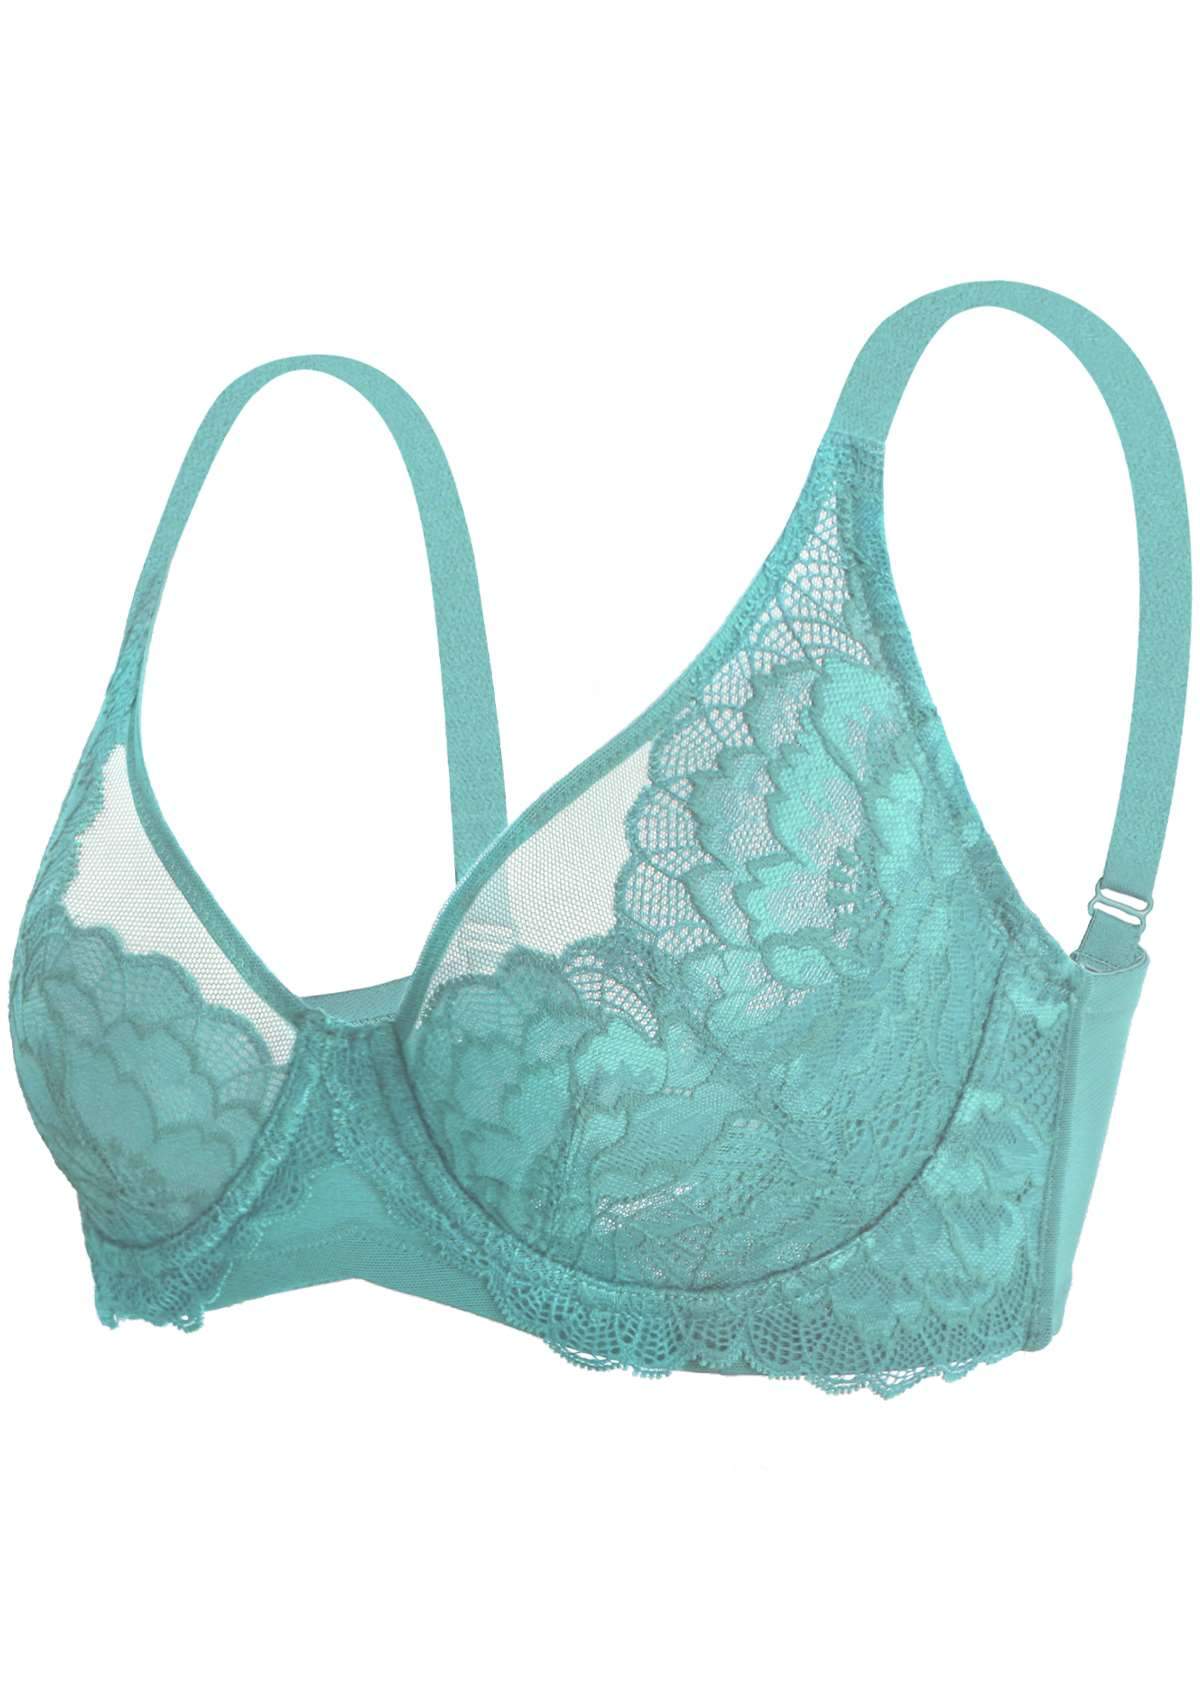 HSIA Paeonia Lace Full Coverage Underwire Non-Padded Uplifting Bra - Light Coral / 42 / C